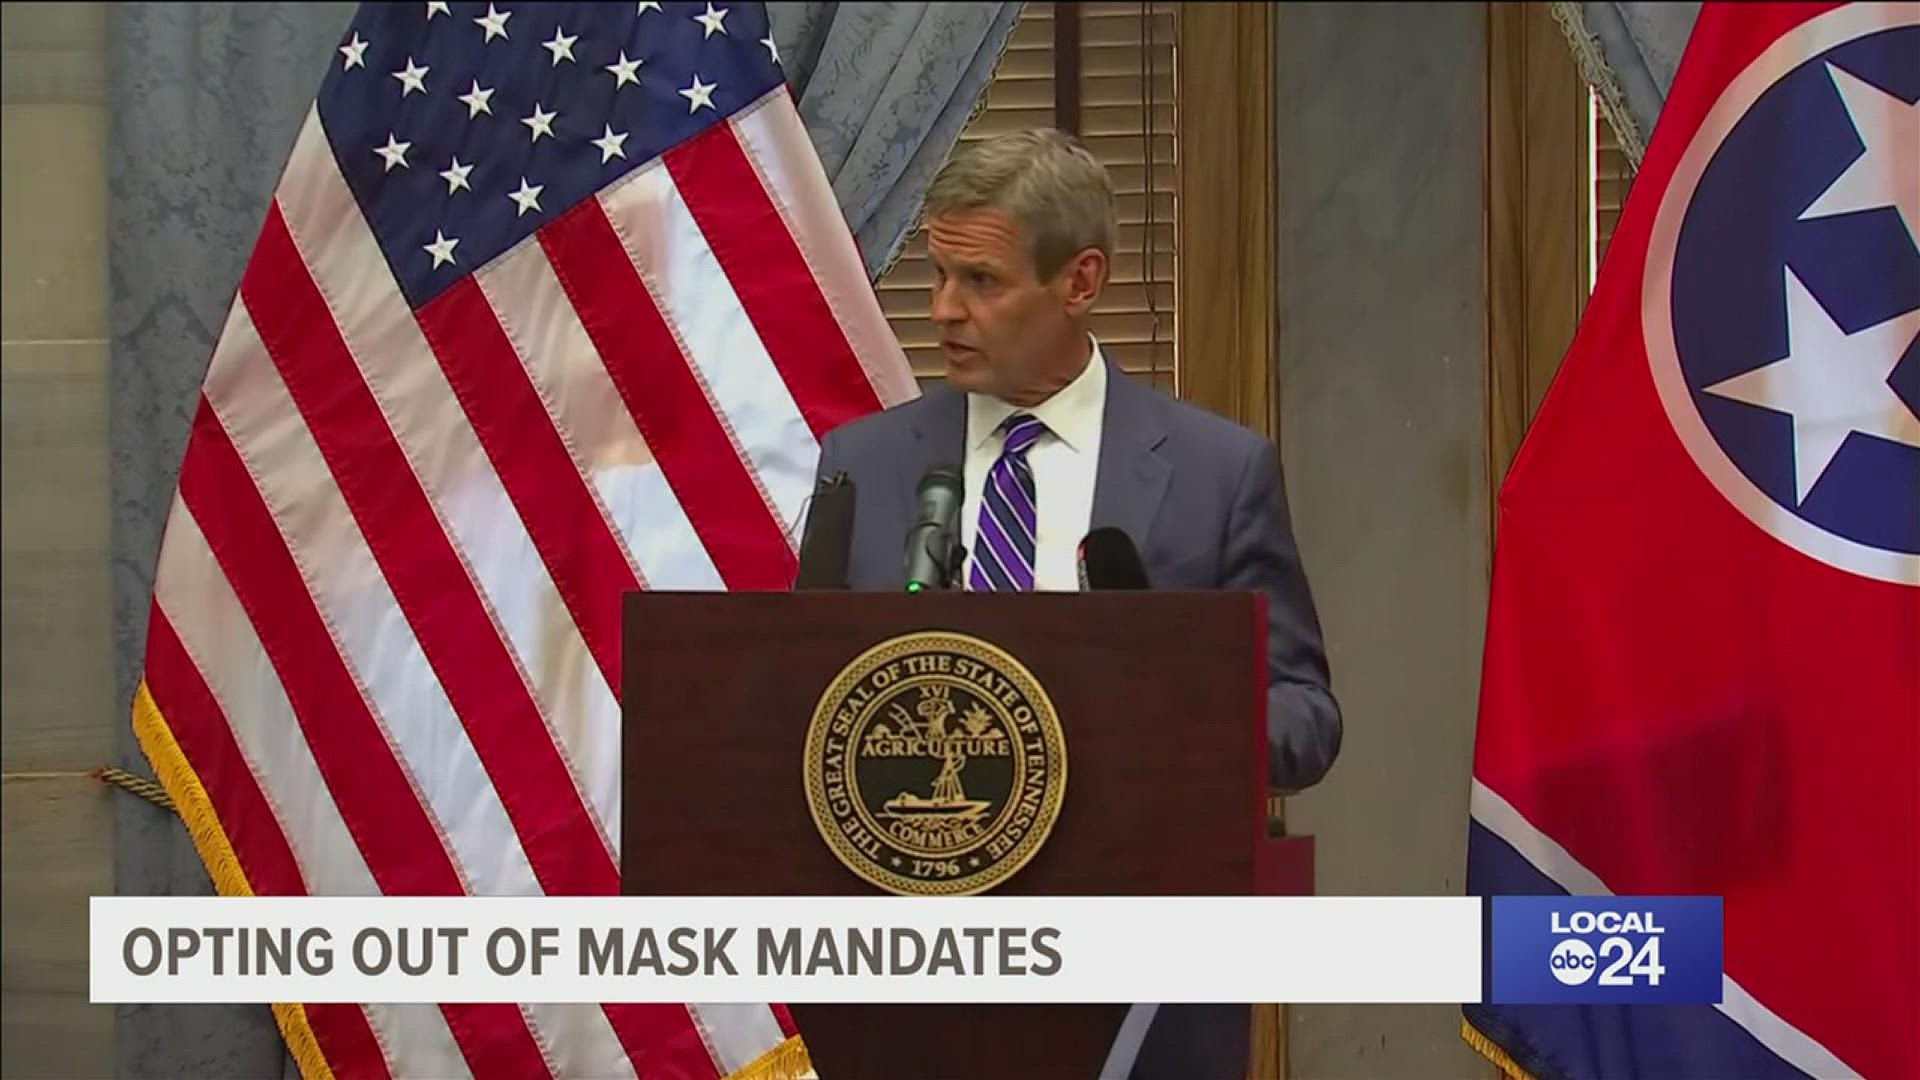 “Masks are no silver bullet, but we know they help. Politicians should stay out of it and let doctors do what they know best.”